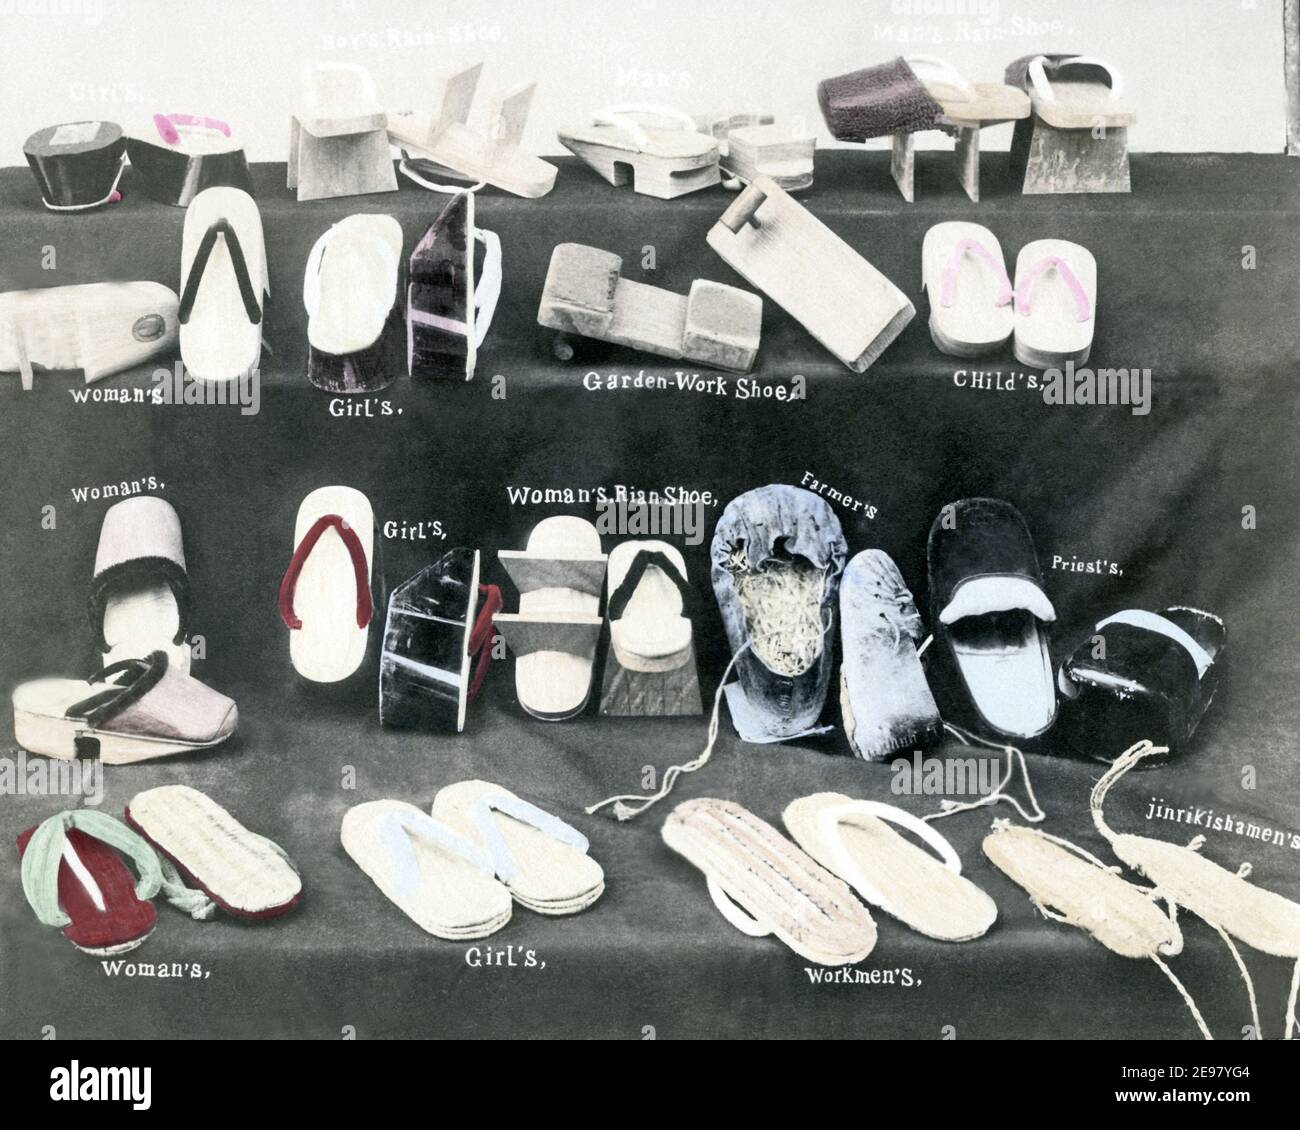 Late 19th century photograph - Shoe Selection, Japan, shoes, slippers